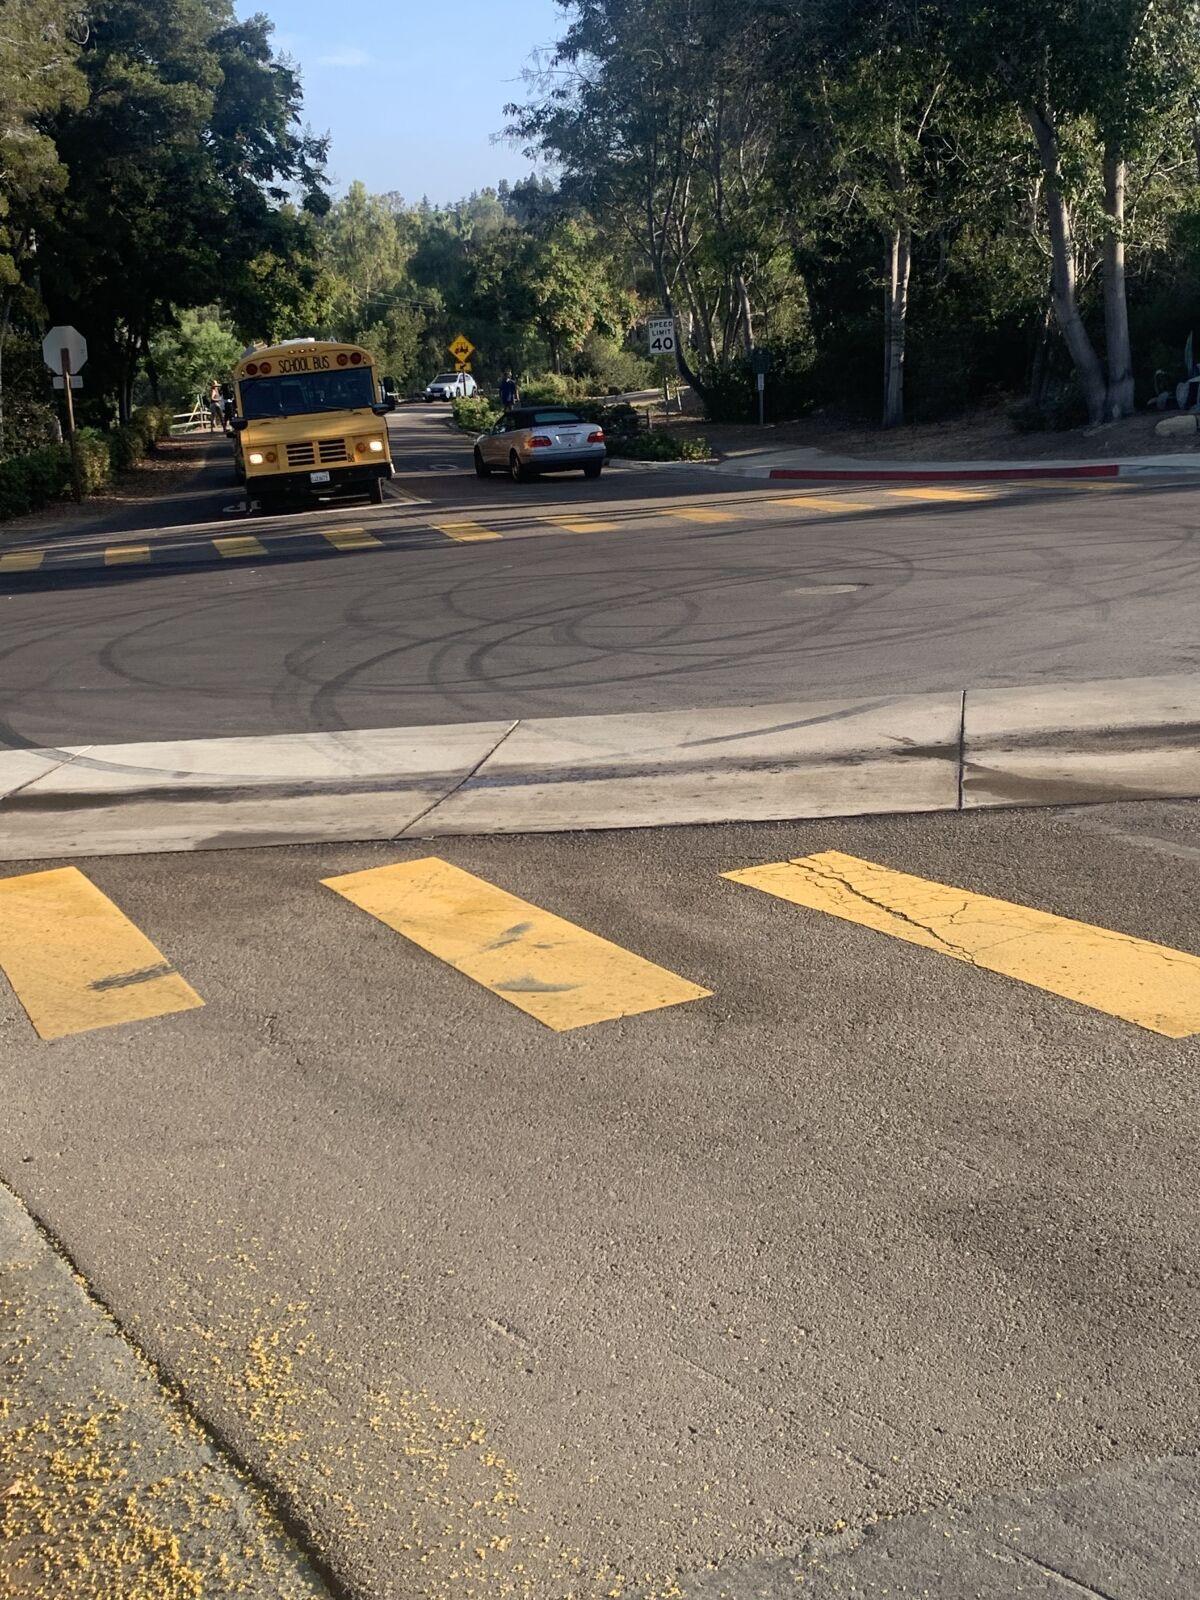 The marks from car tricks left in the La Granada intersection.